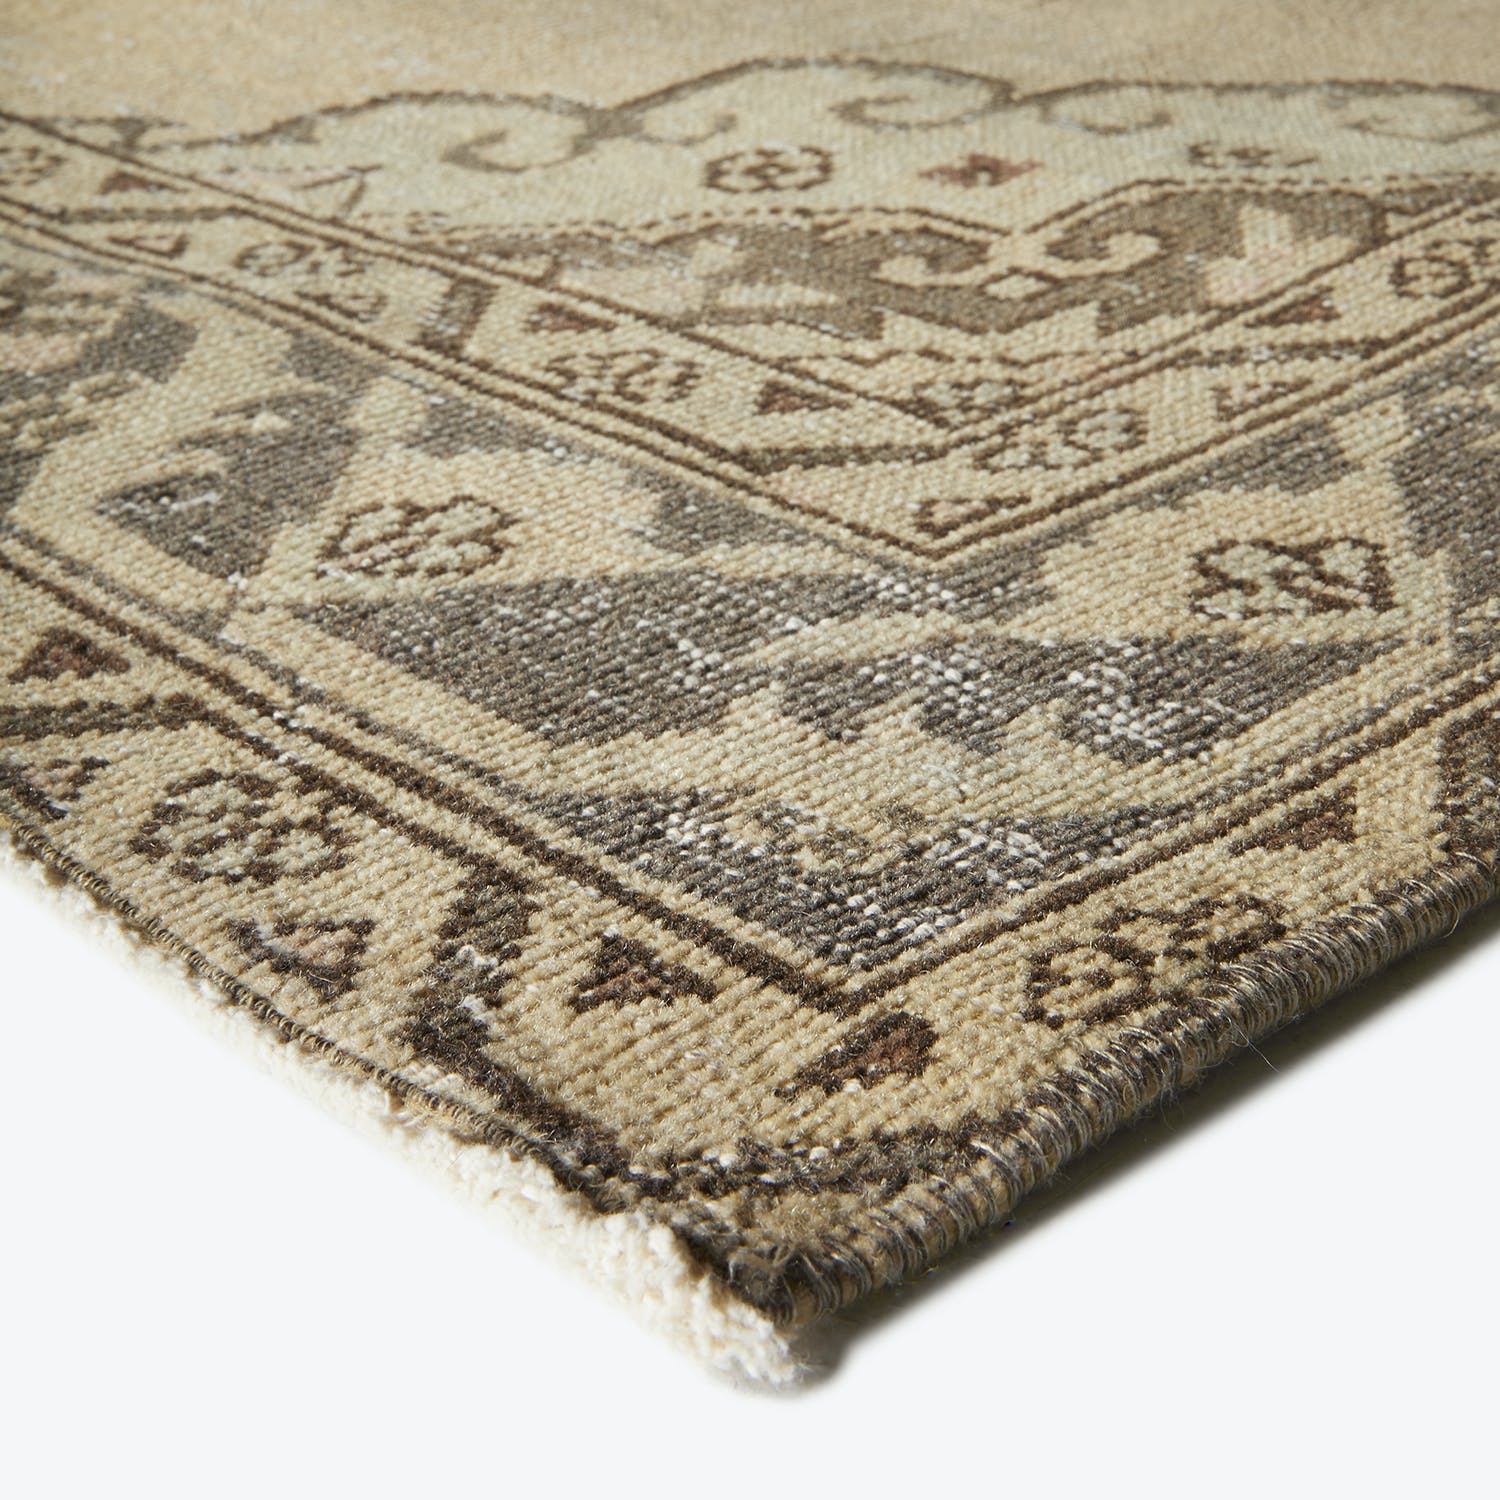 Close-up of a traditional area rug with floral and geometric motifs.